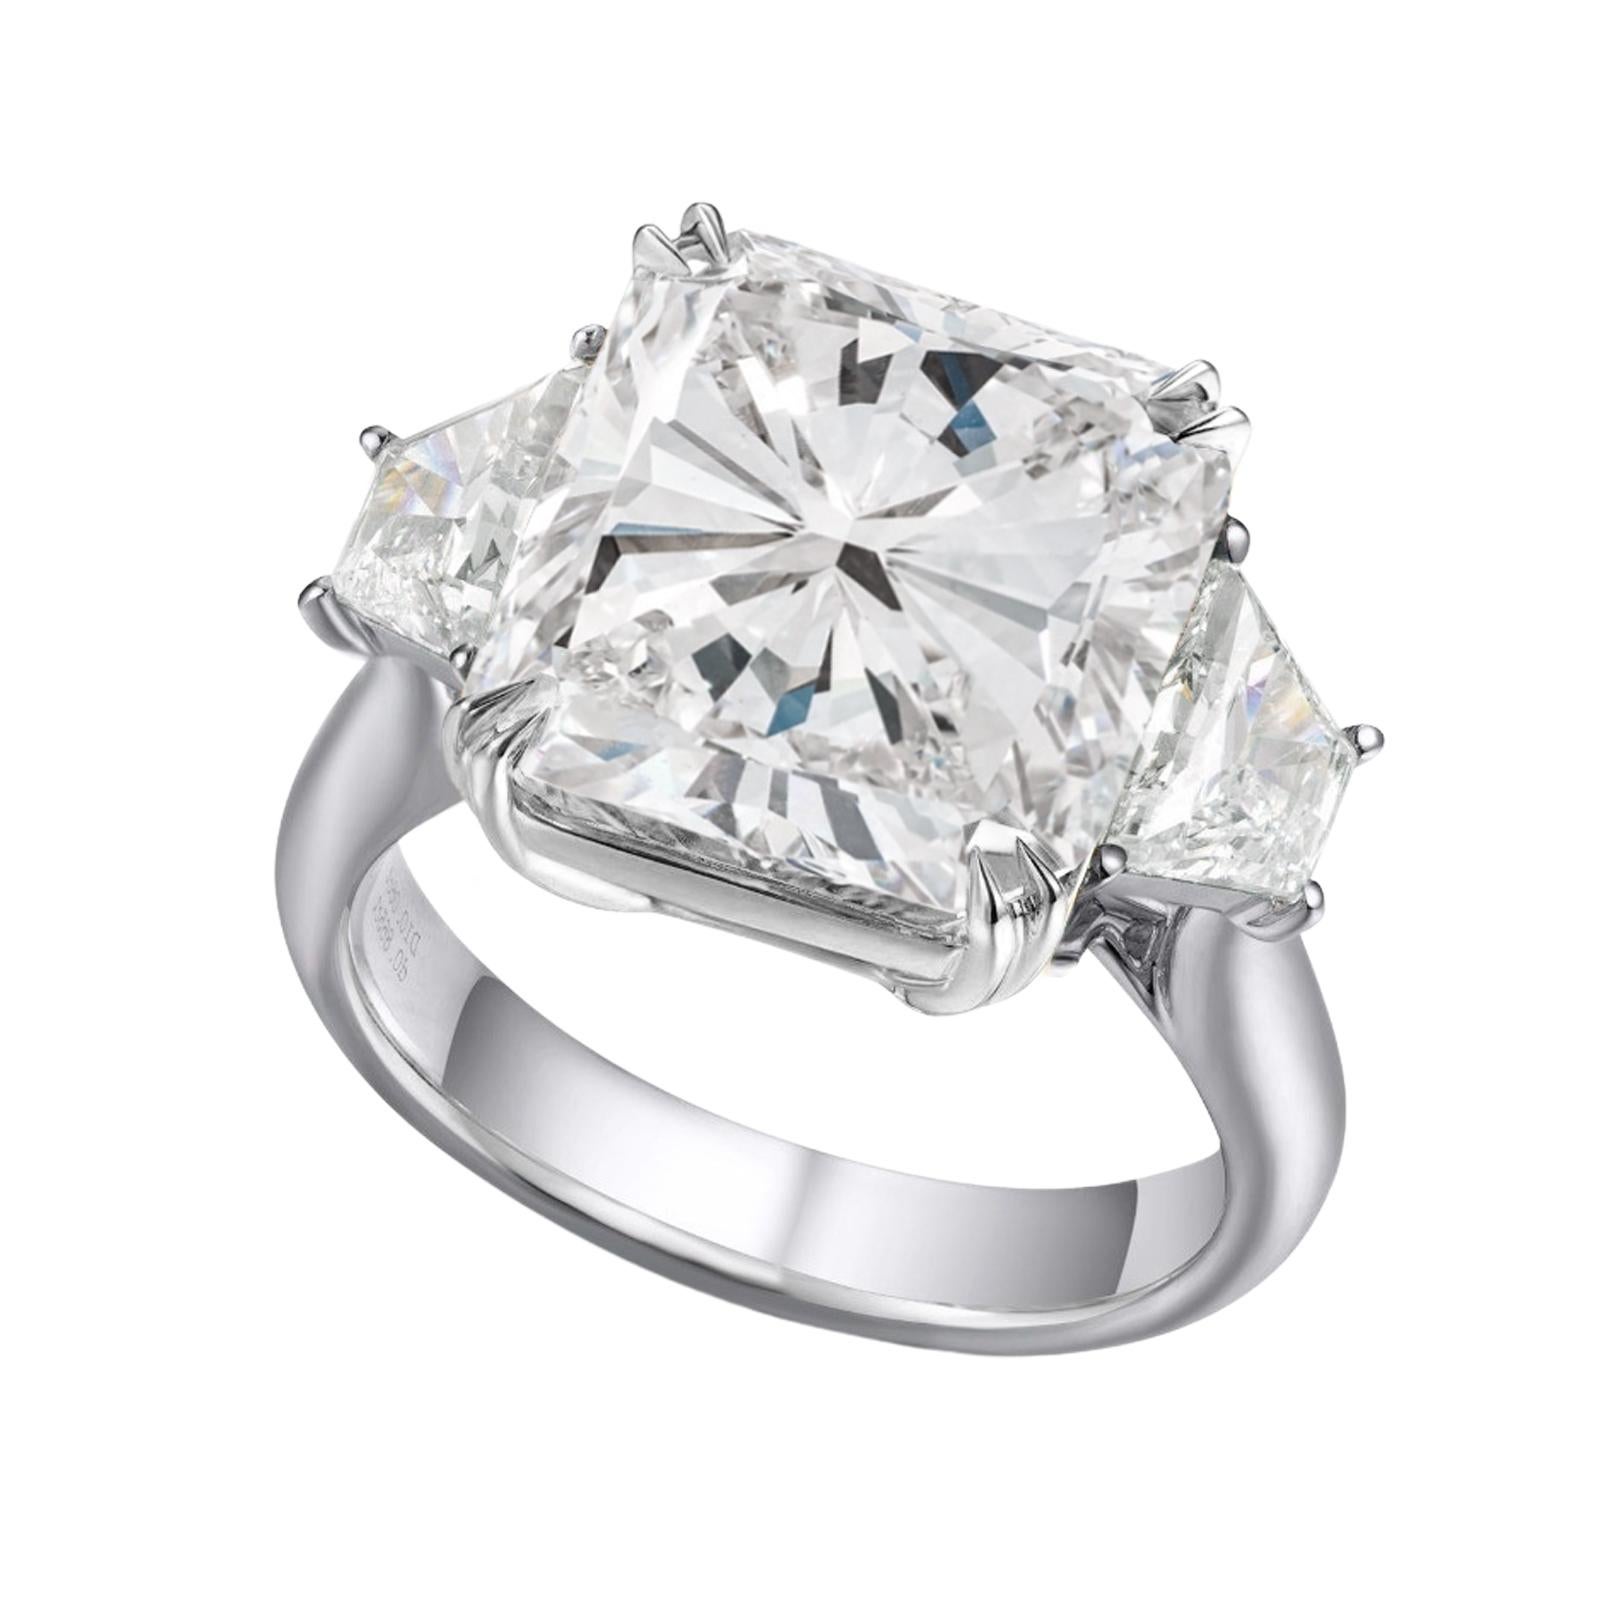 Introducing a truly mesmerizing centerpiece in the realm of luxury—our exceptional brilliant cushion diamond, adorned by the company of two sleek tapered baguette diamonds. This radiant ensemble is elegantly cradled in a setting of solid platinum,